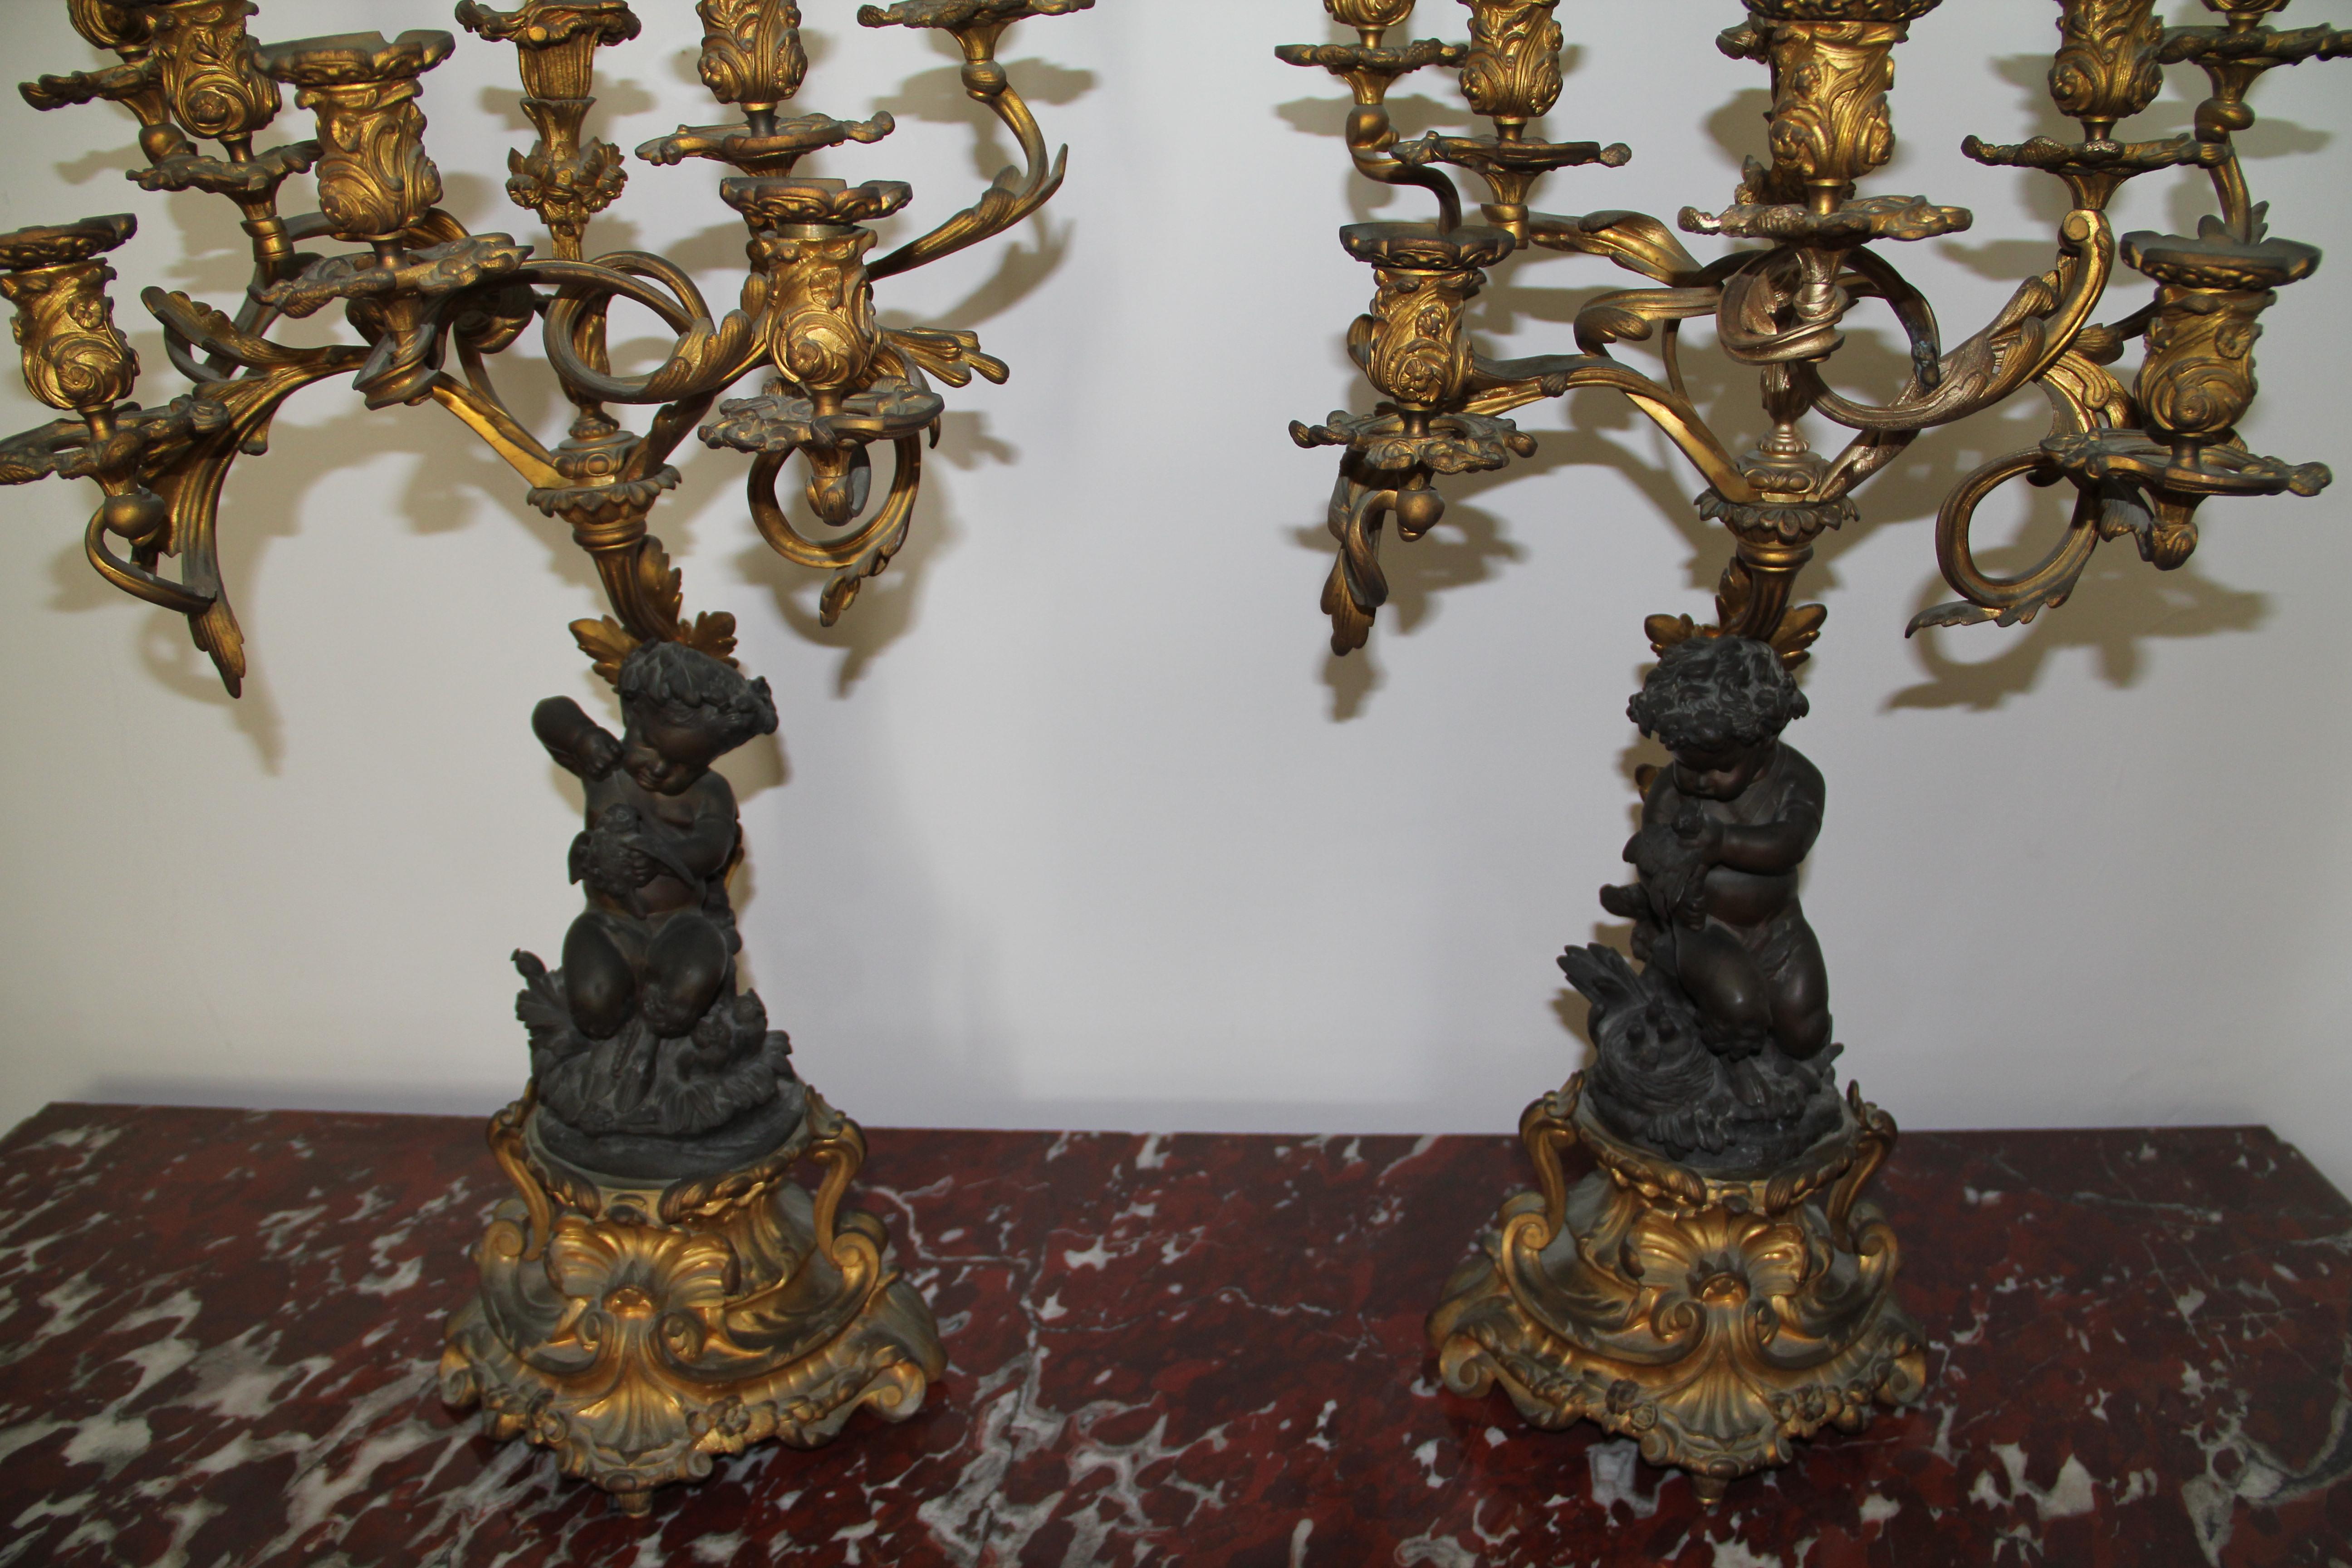 French Pair of Bronze and Gilt-Bronze Candelabra Louis XV Style, Mid-19th Century For Sale